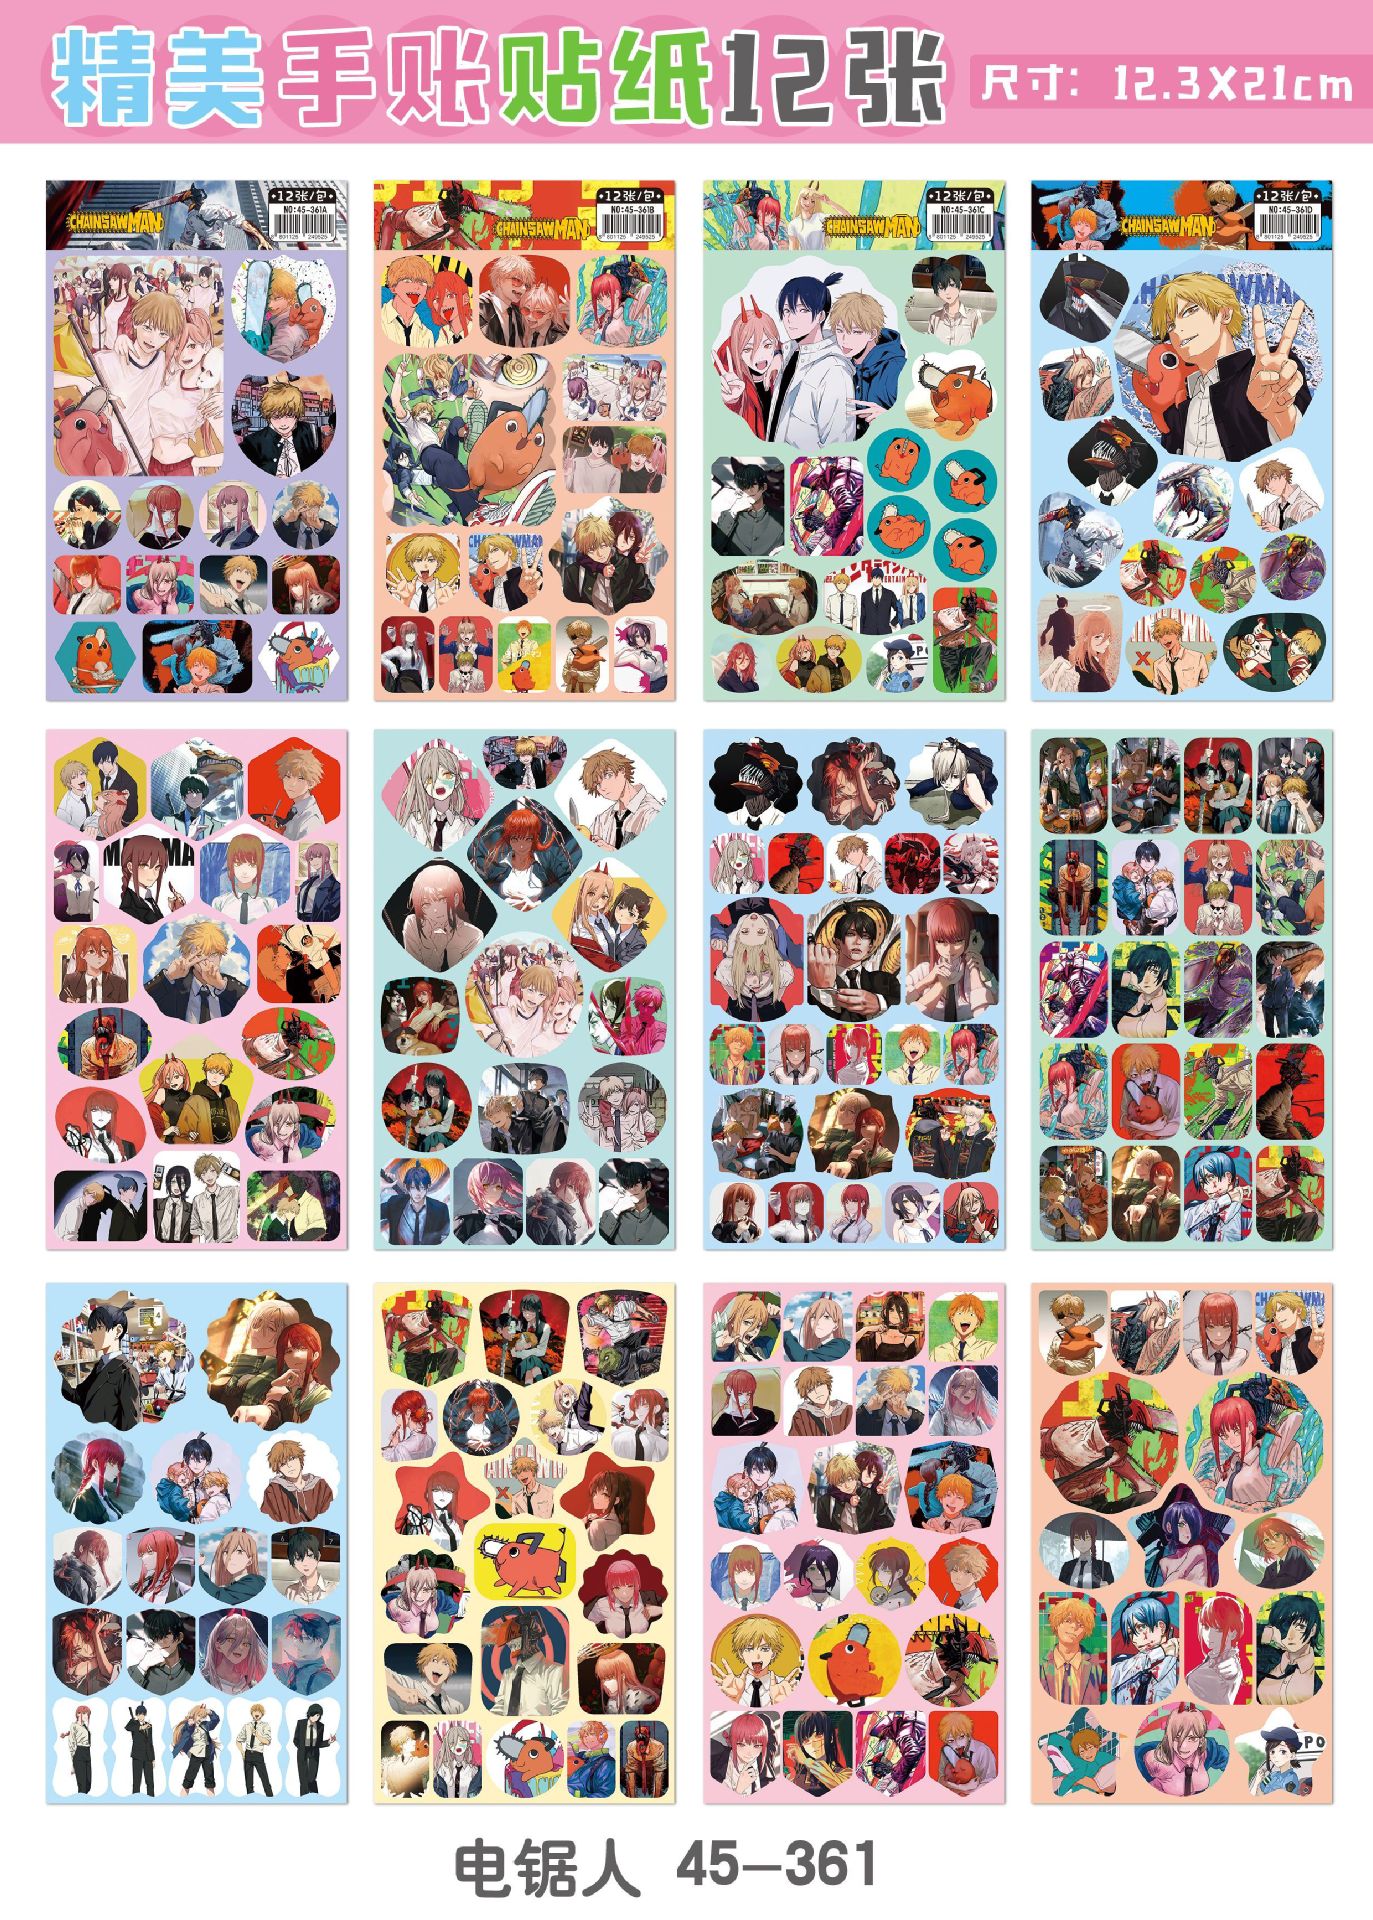 chainsaw man anime sticker price for 12 pcs